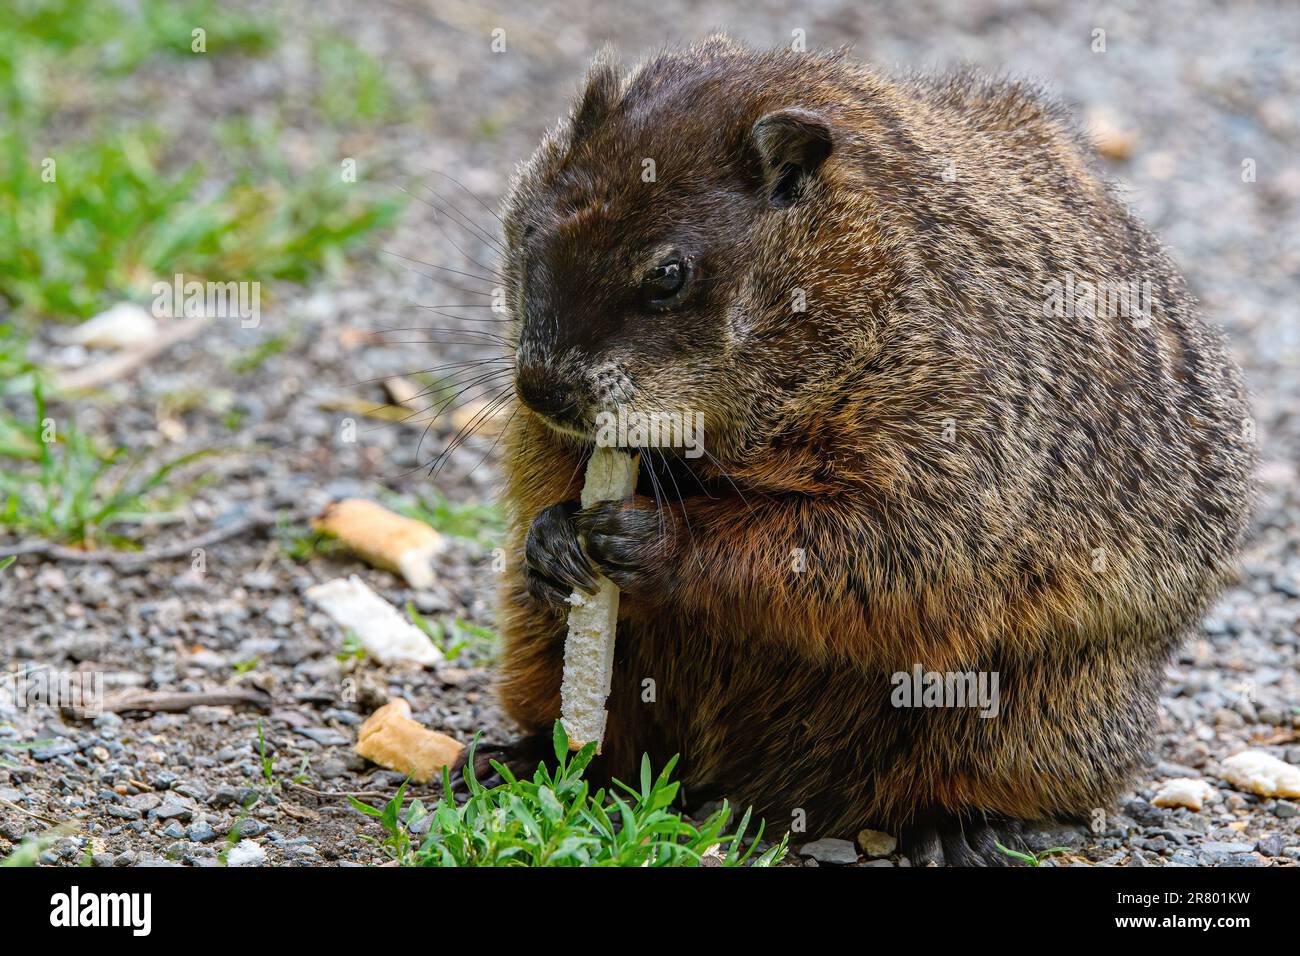 Closeup of a groundhog eating a stick of bread. He holds the bread in his paws as he nibbles. He stands on gravel with bits of grass and bread. Stock Photo